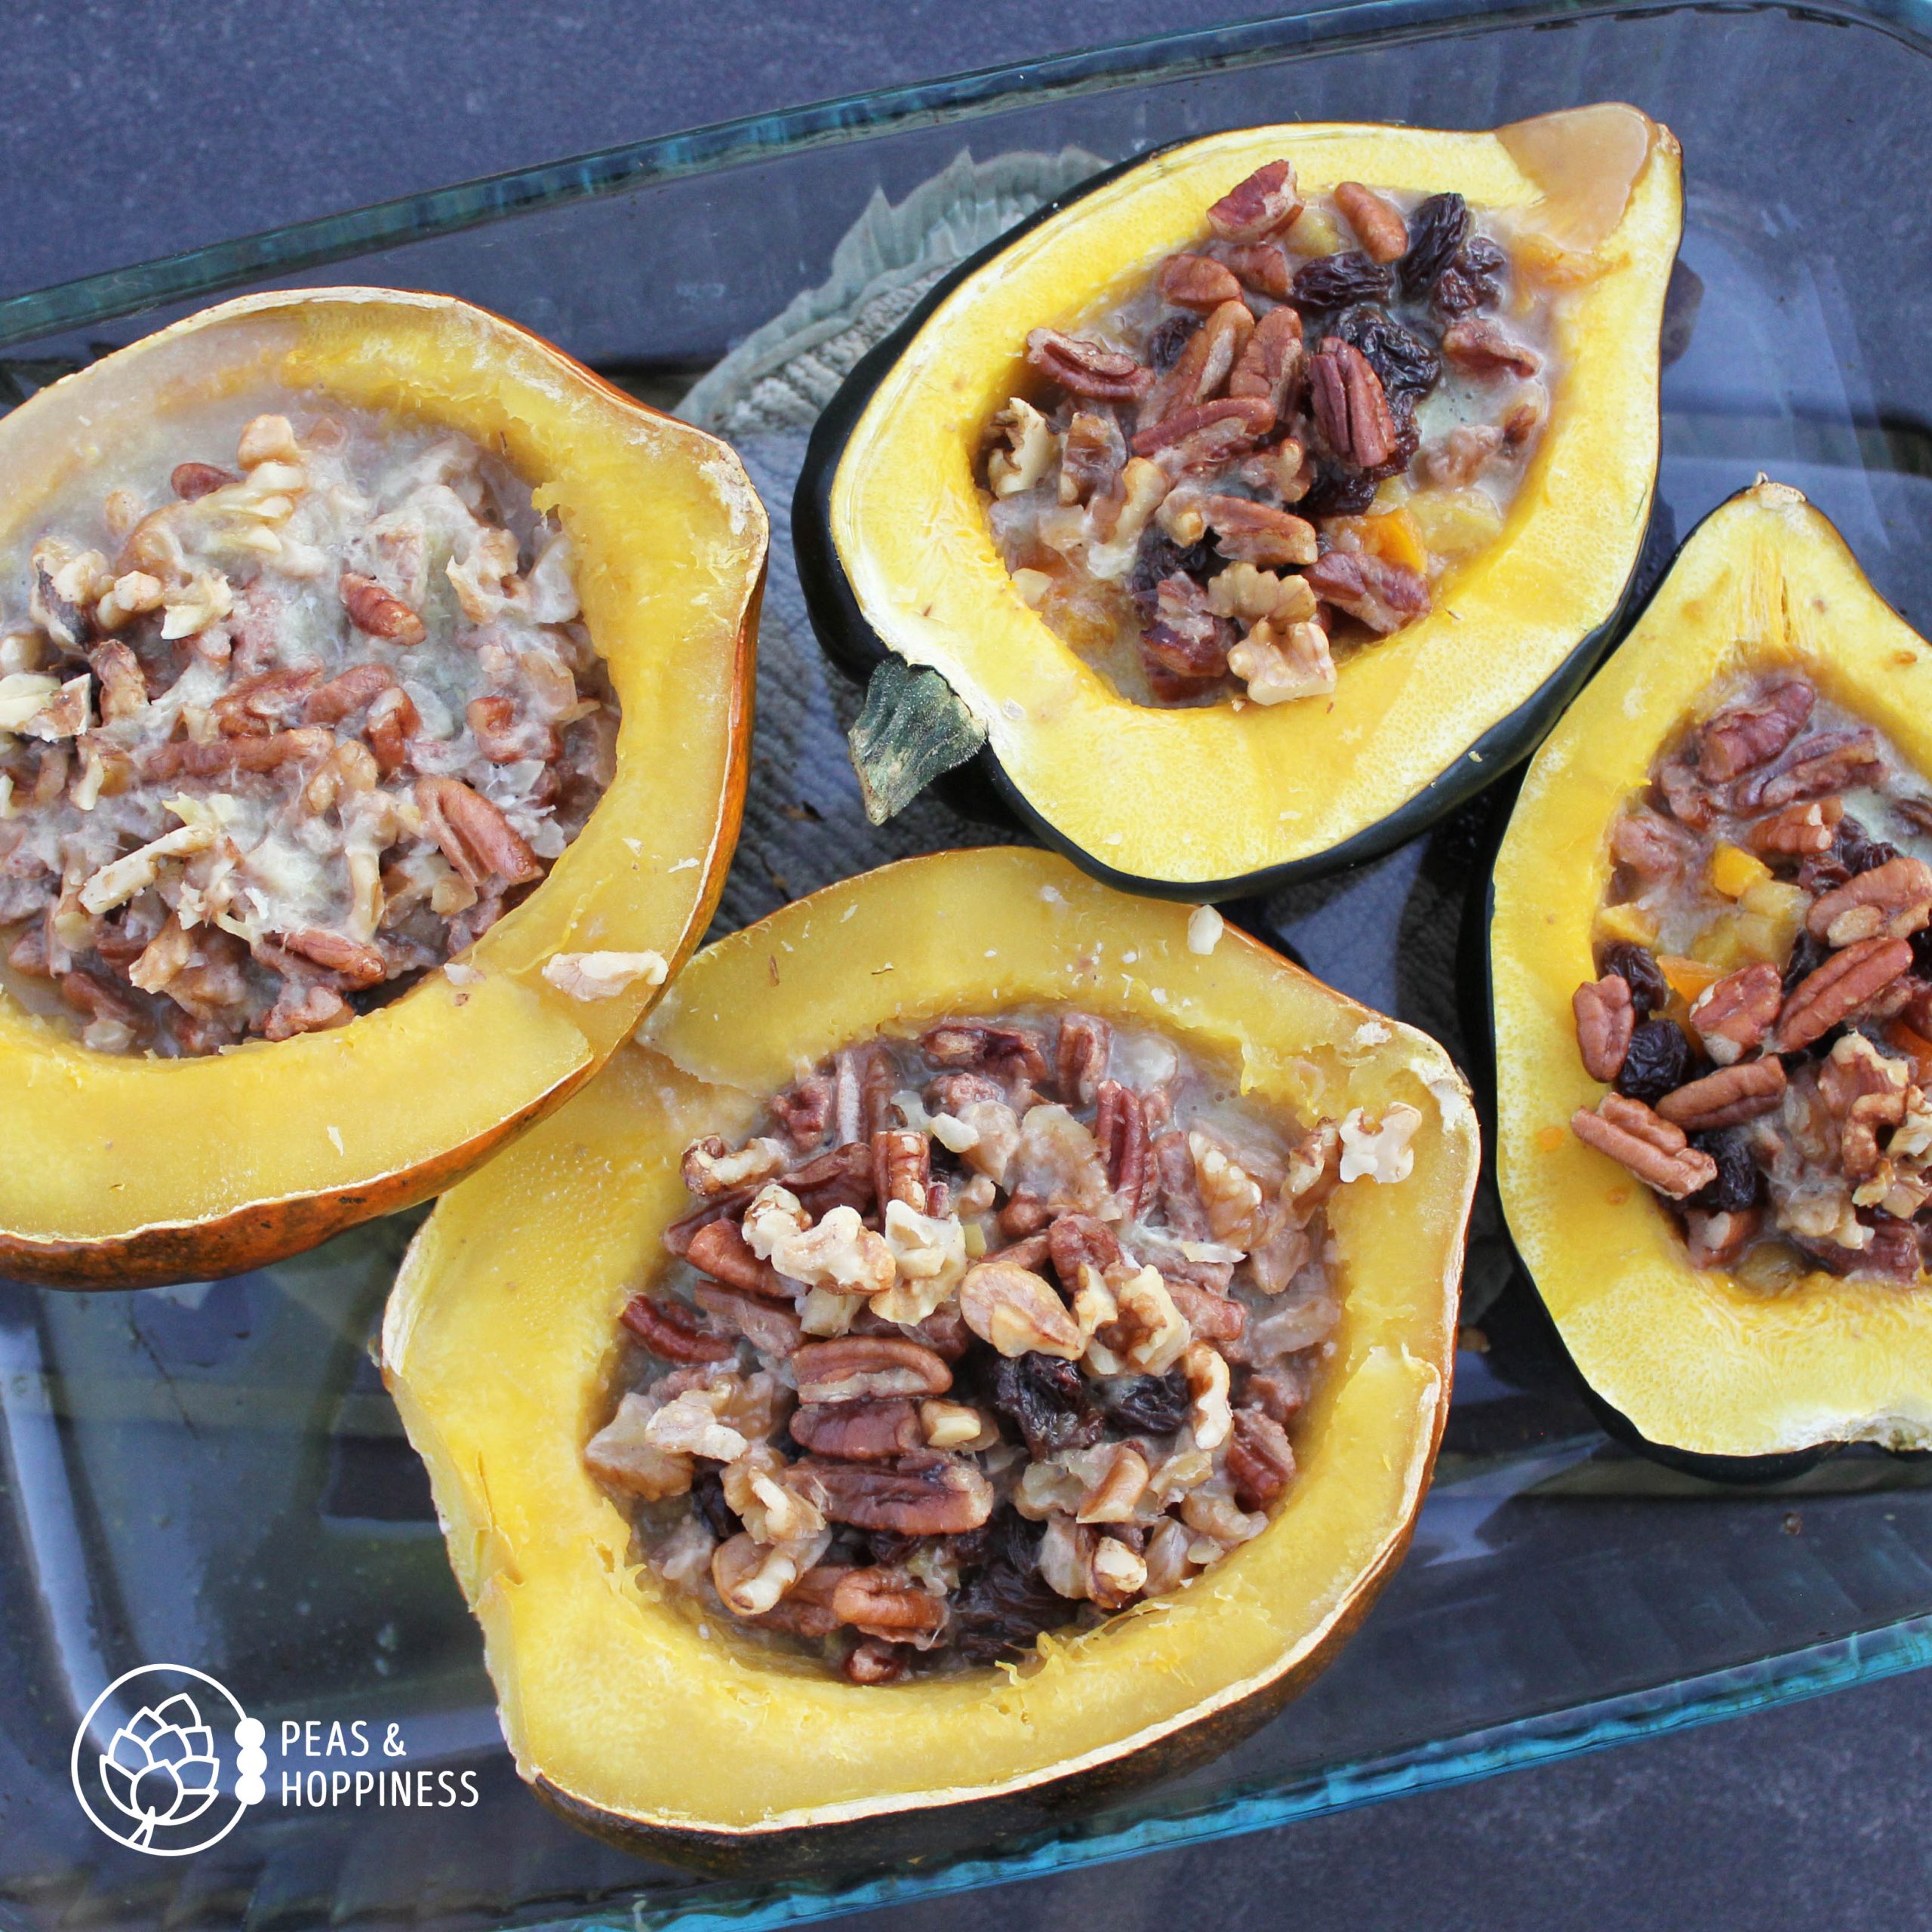 Acorn Squash Stuffed with Dried Fruits and Nuts - Dairy Free Gluten Free Vegan Holiday Recipe from Peas and Hoppiness - Overhead view square